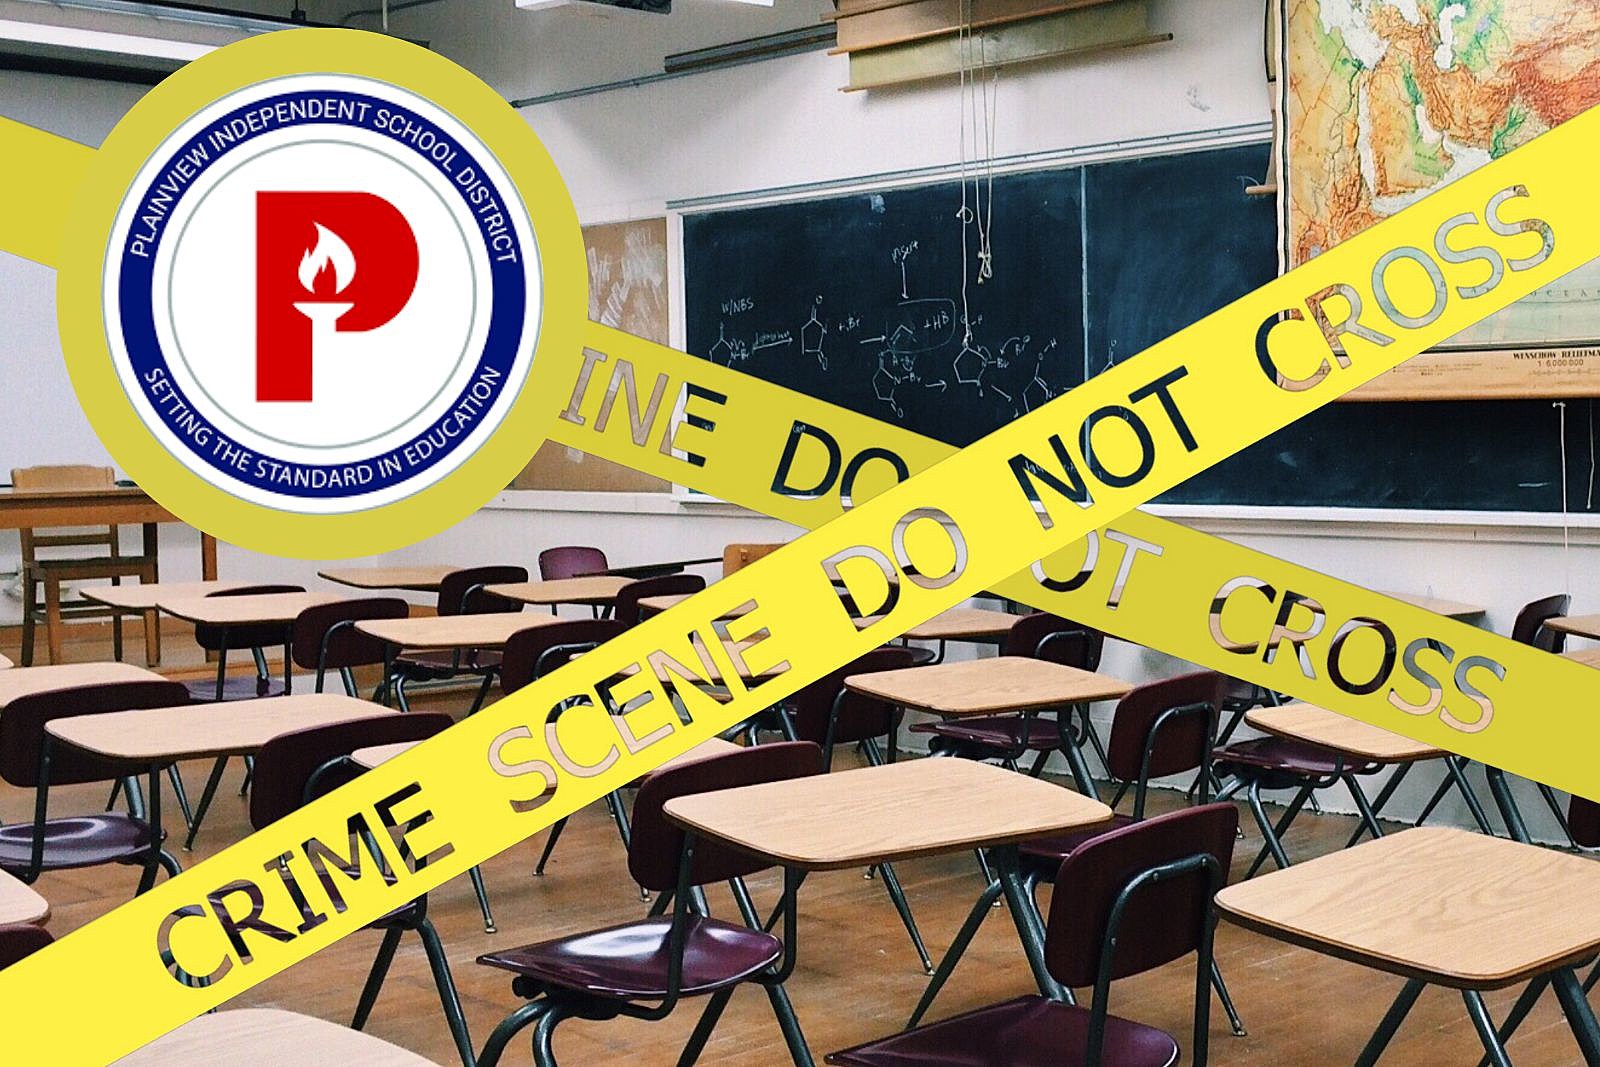 Girl, 6, Reportedly Assaulted By Classmates at Plainview School image pic